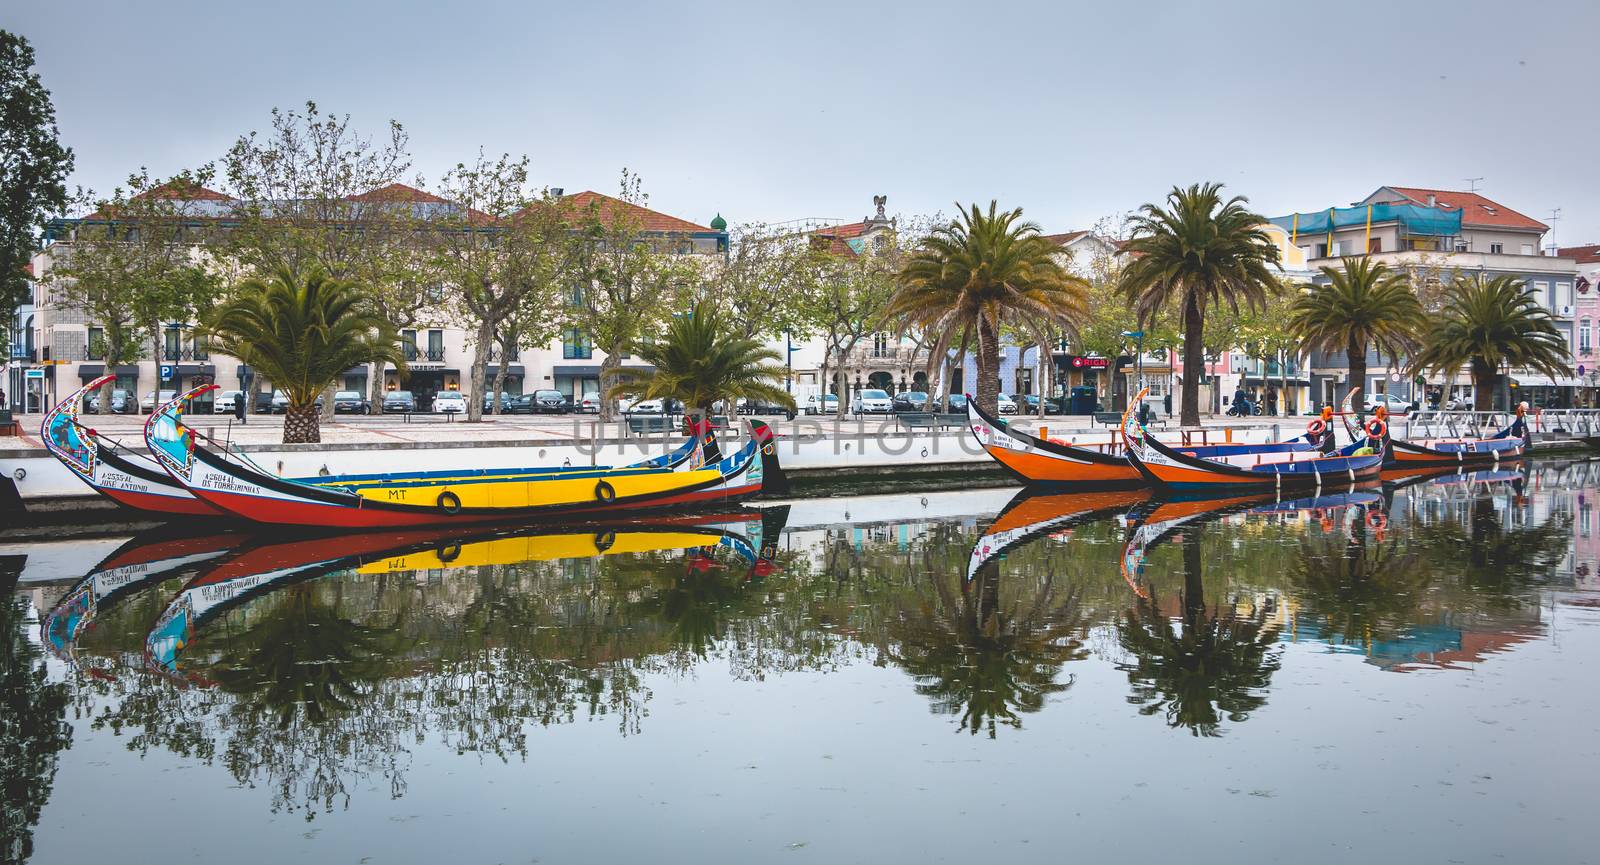 Tourists walk on famous Moliceiros of aveiro in Portugal by AtlanticEUROSTOXX